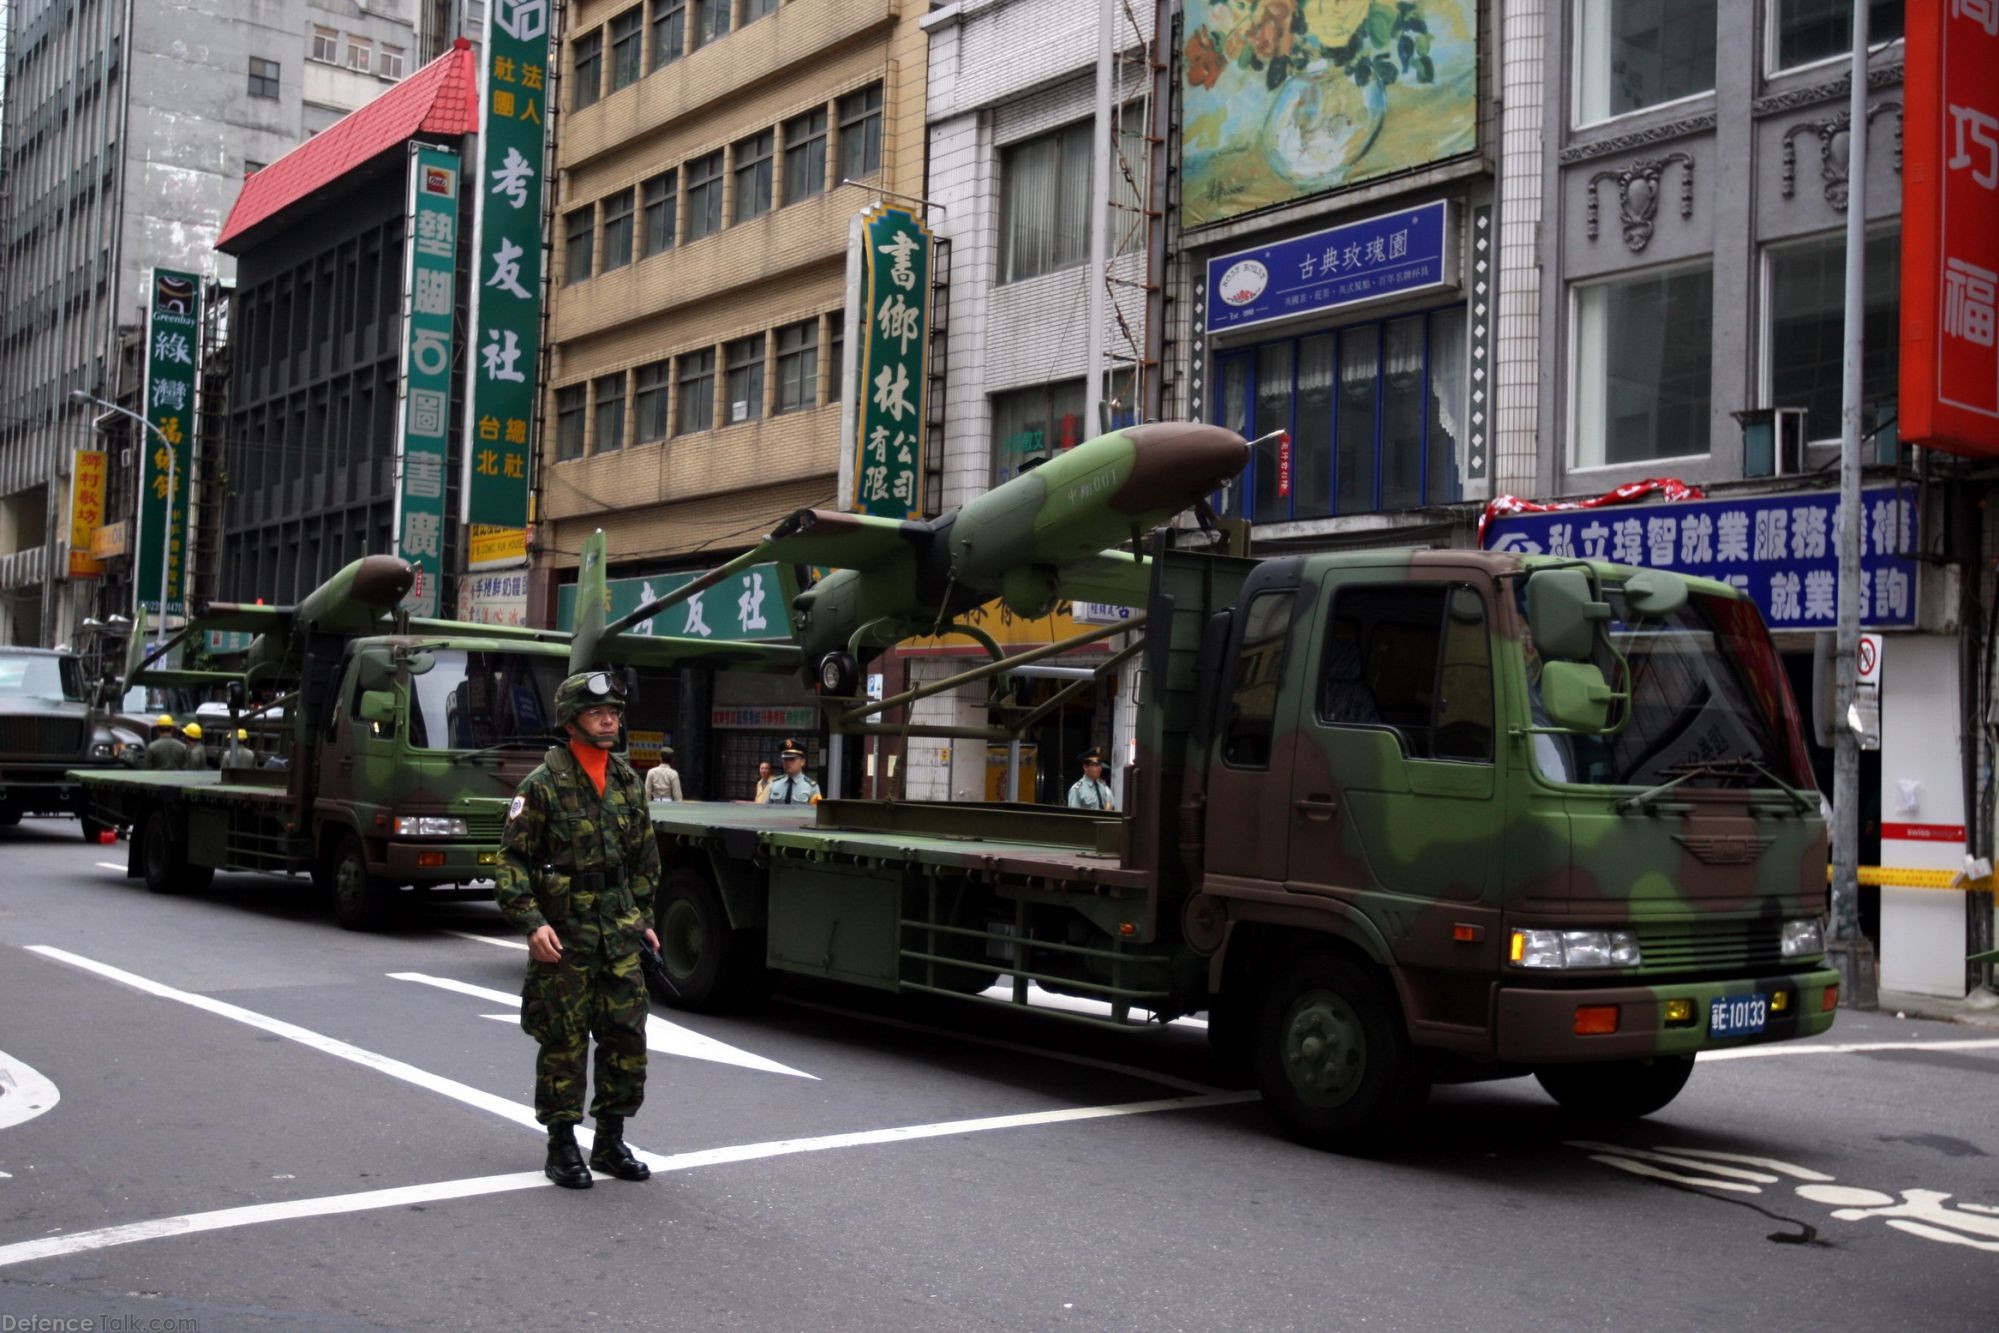 UAV at the Military Parade - Taiwan Armed Forces